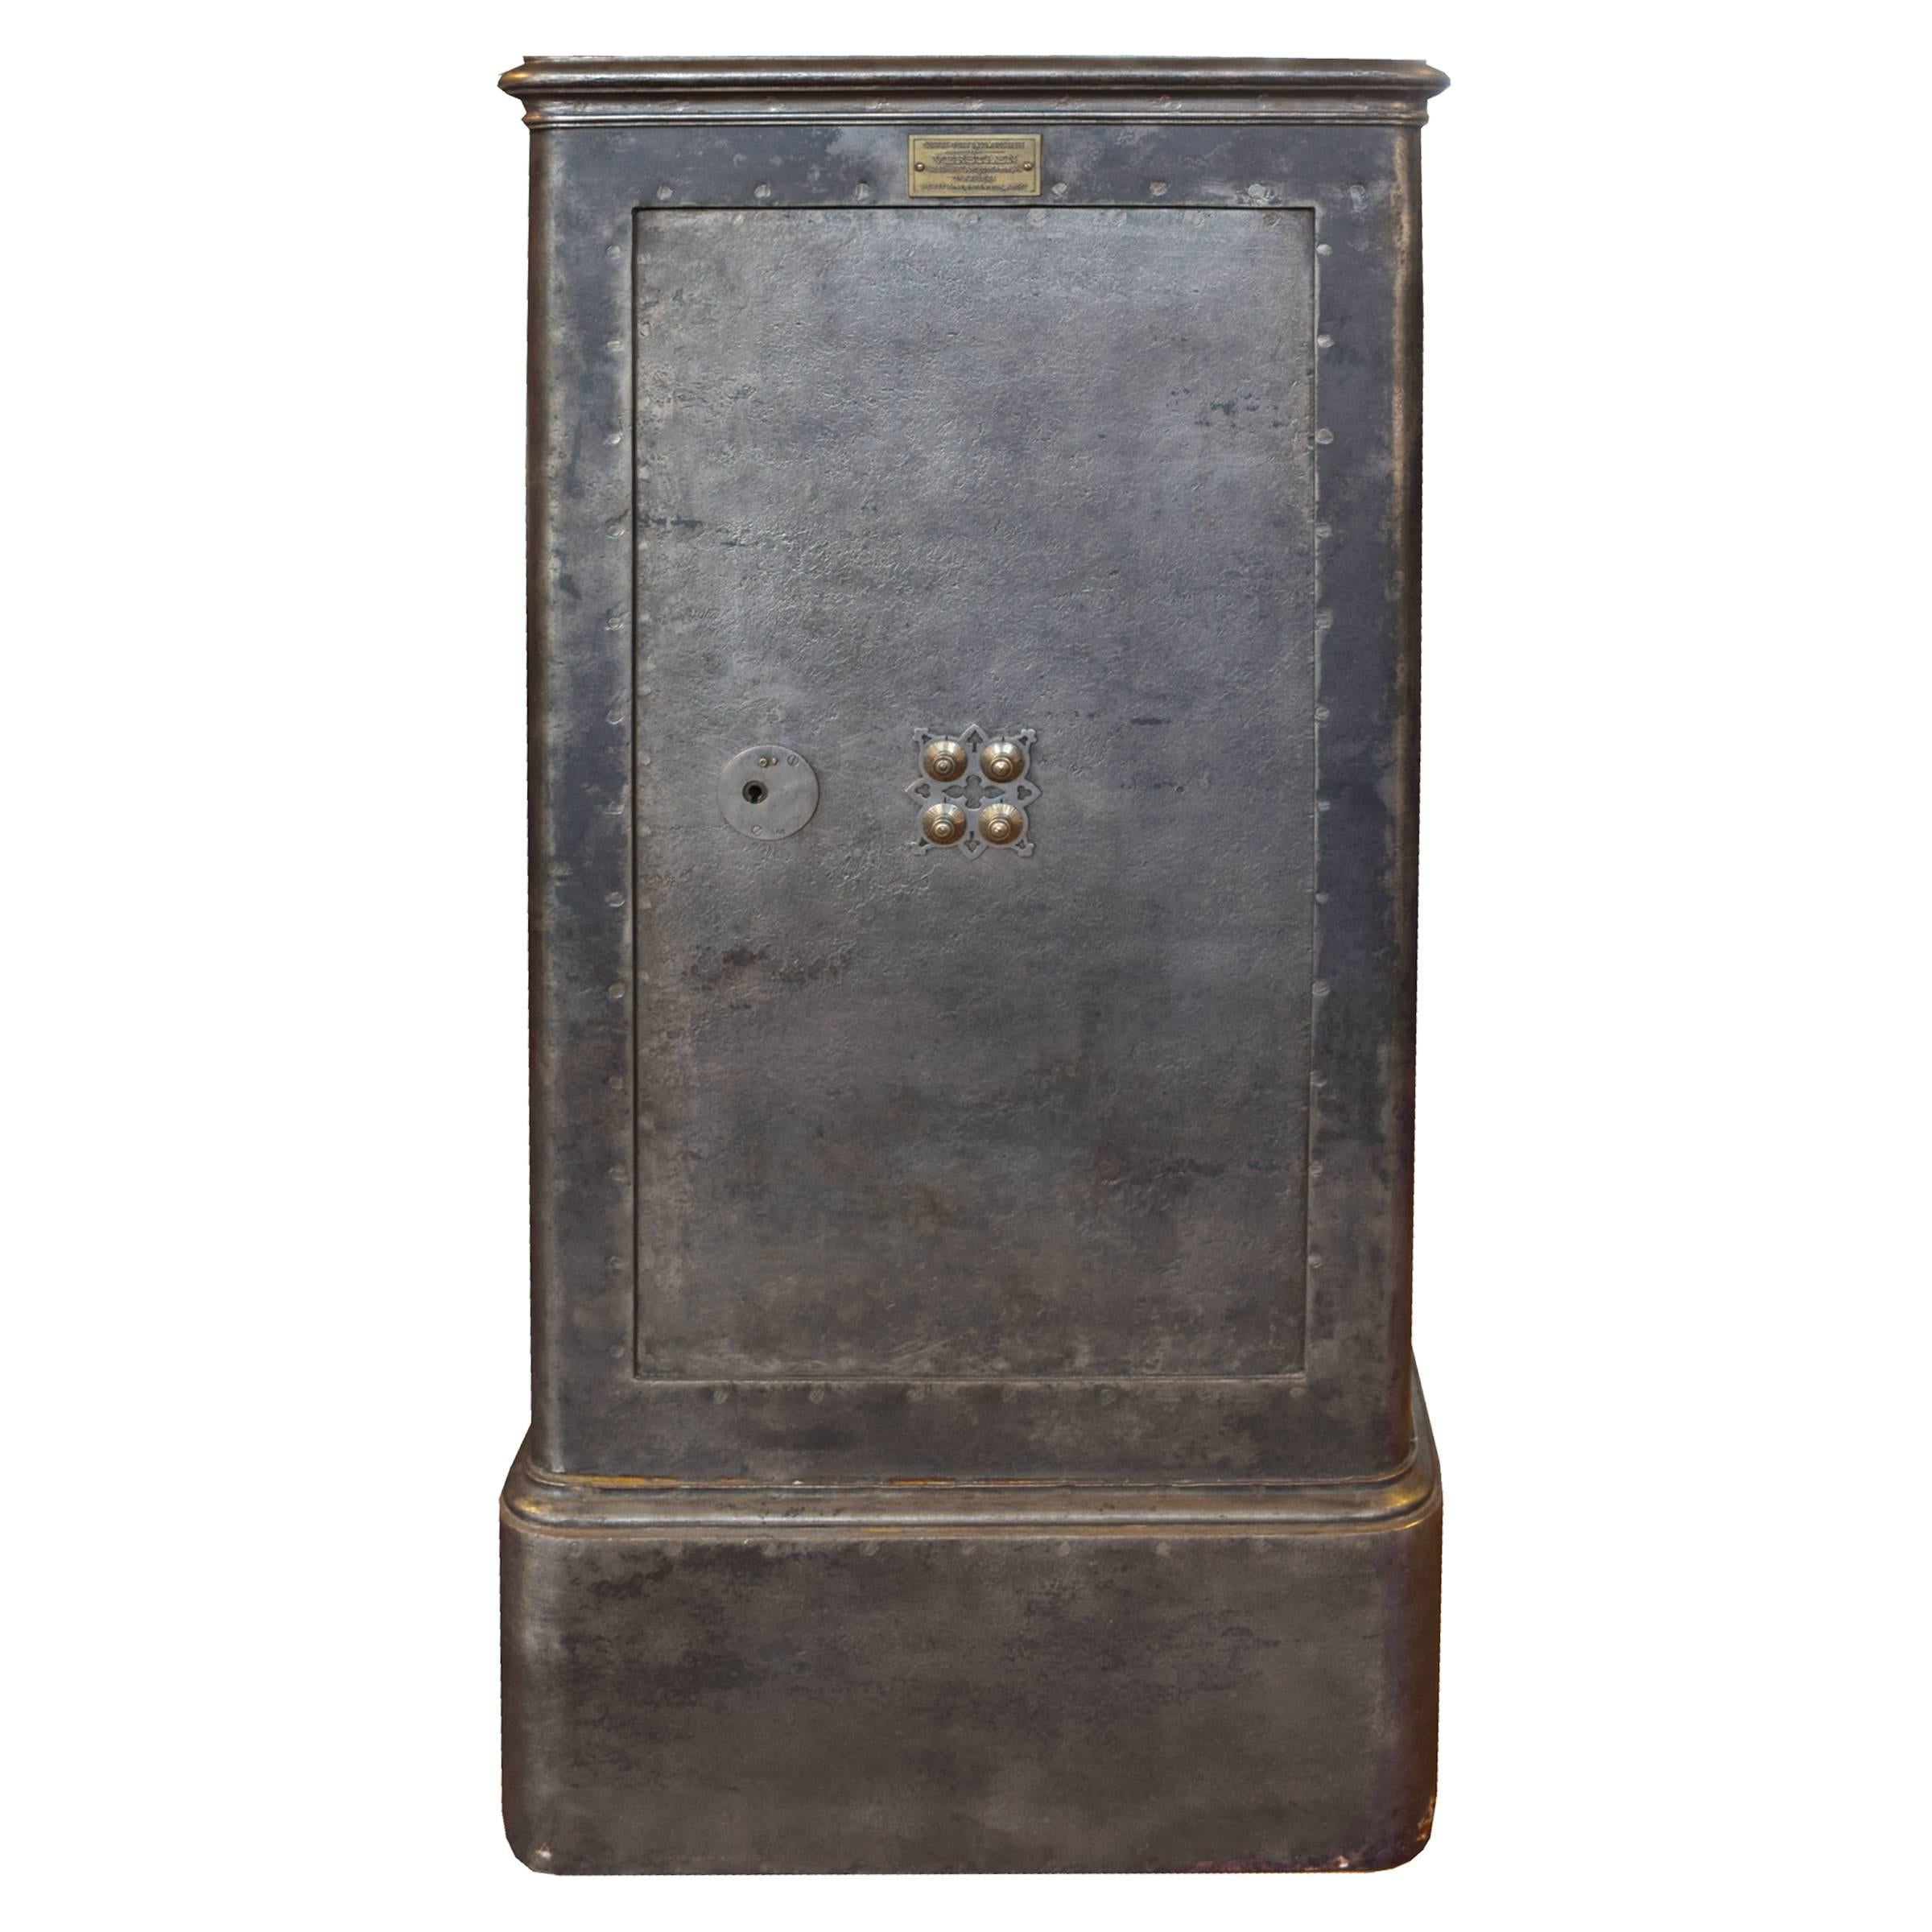 A large French cast iron fireproof safe by Verstaen of Paris, with a original combination knobs, working key lock, and spacious divided interior, circa 1900.